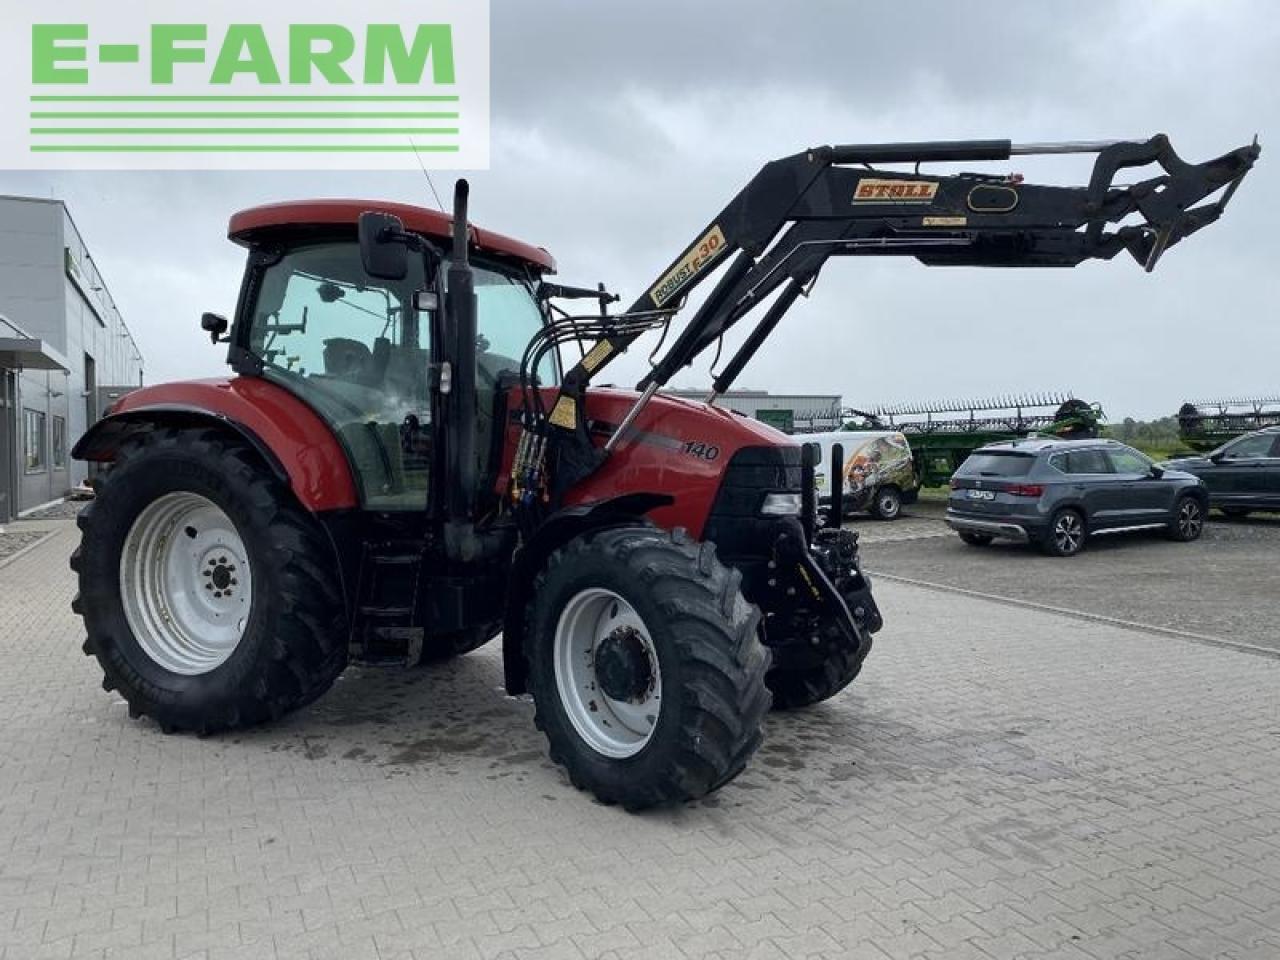 Tractor agricol Case-IH maxxum 140 multicontroller mit stoll frontlader hdp30: Foto 2